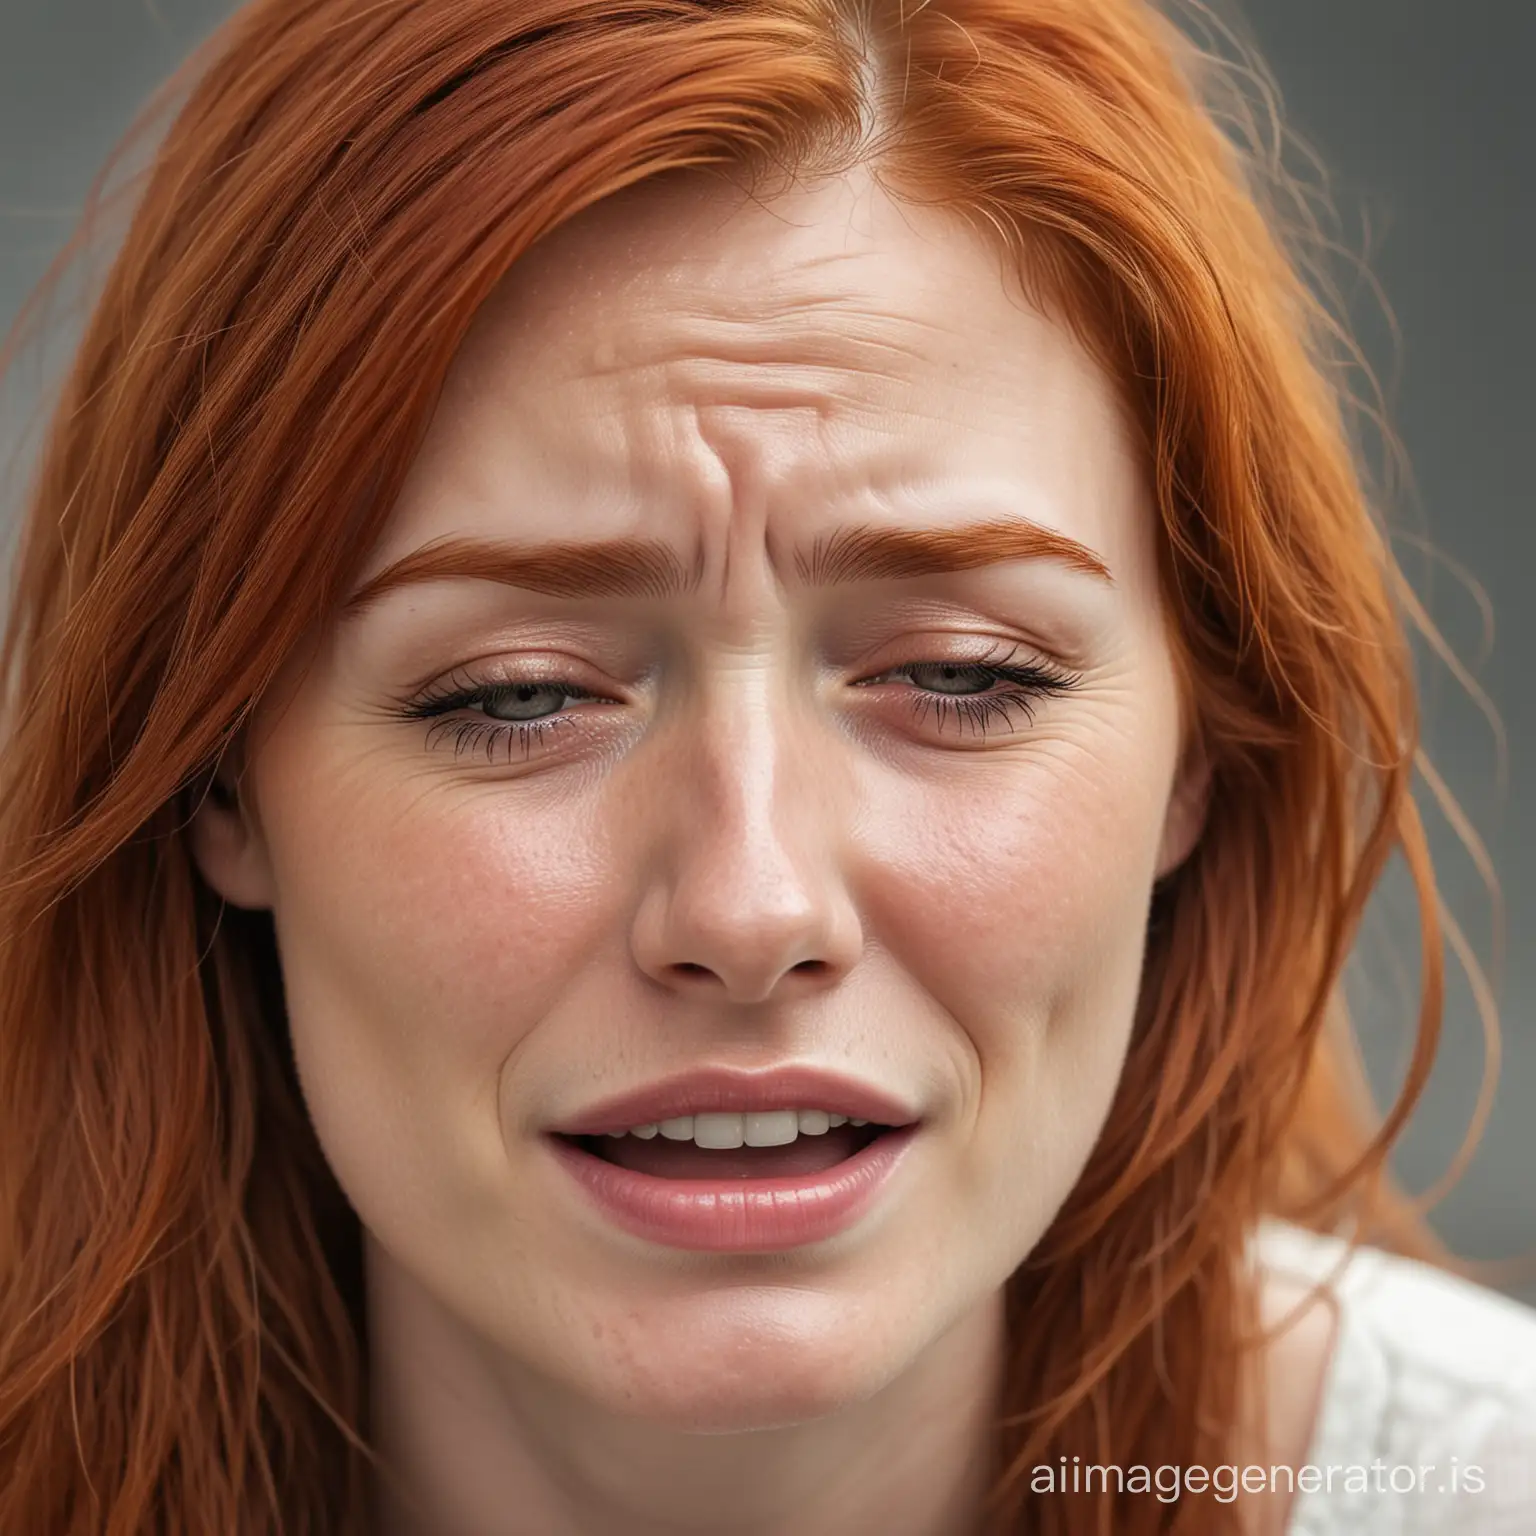 Emotional-Portrait-of-a-Redheaded-Woman-with-Tears